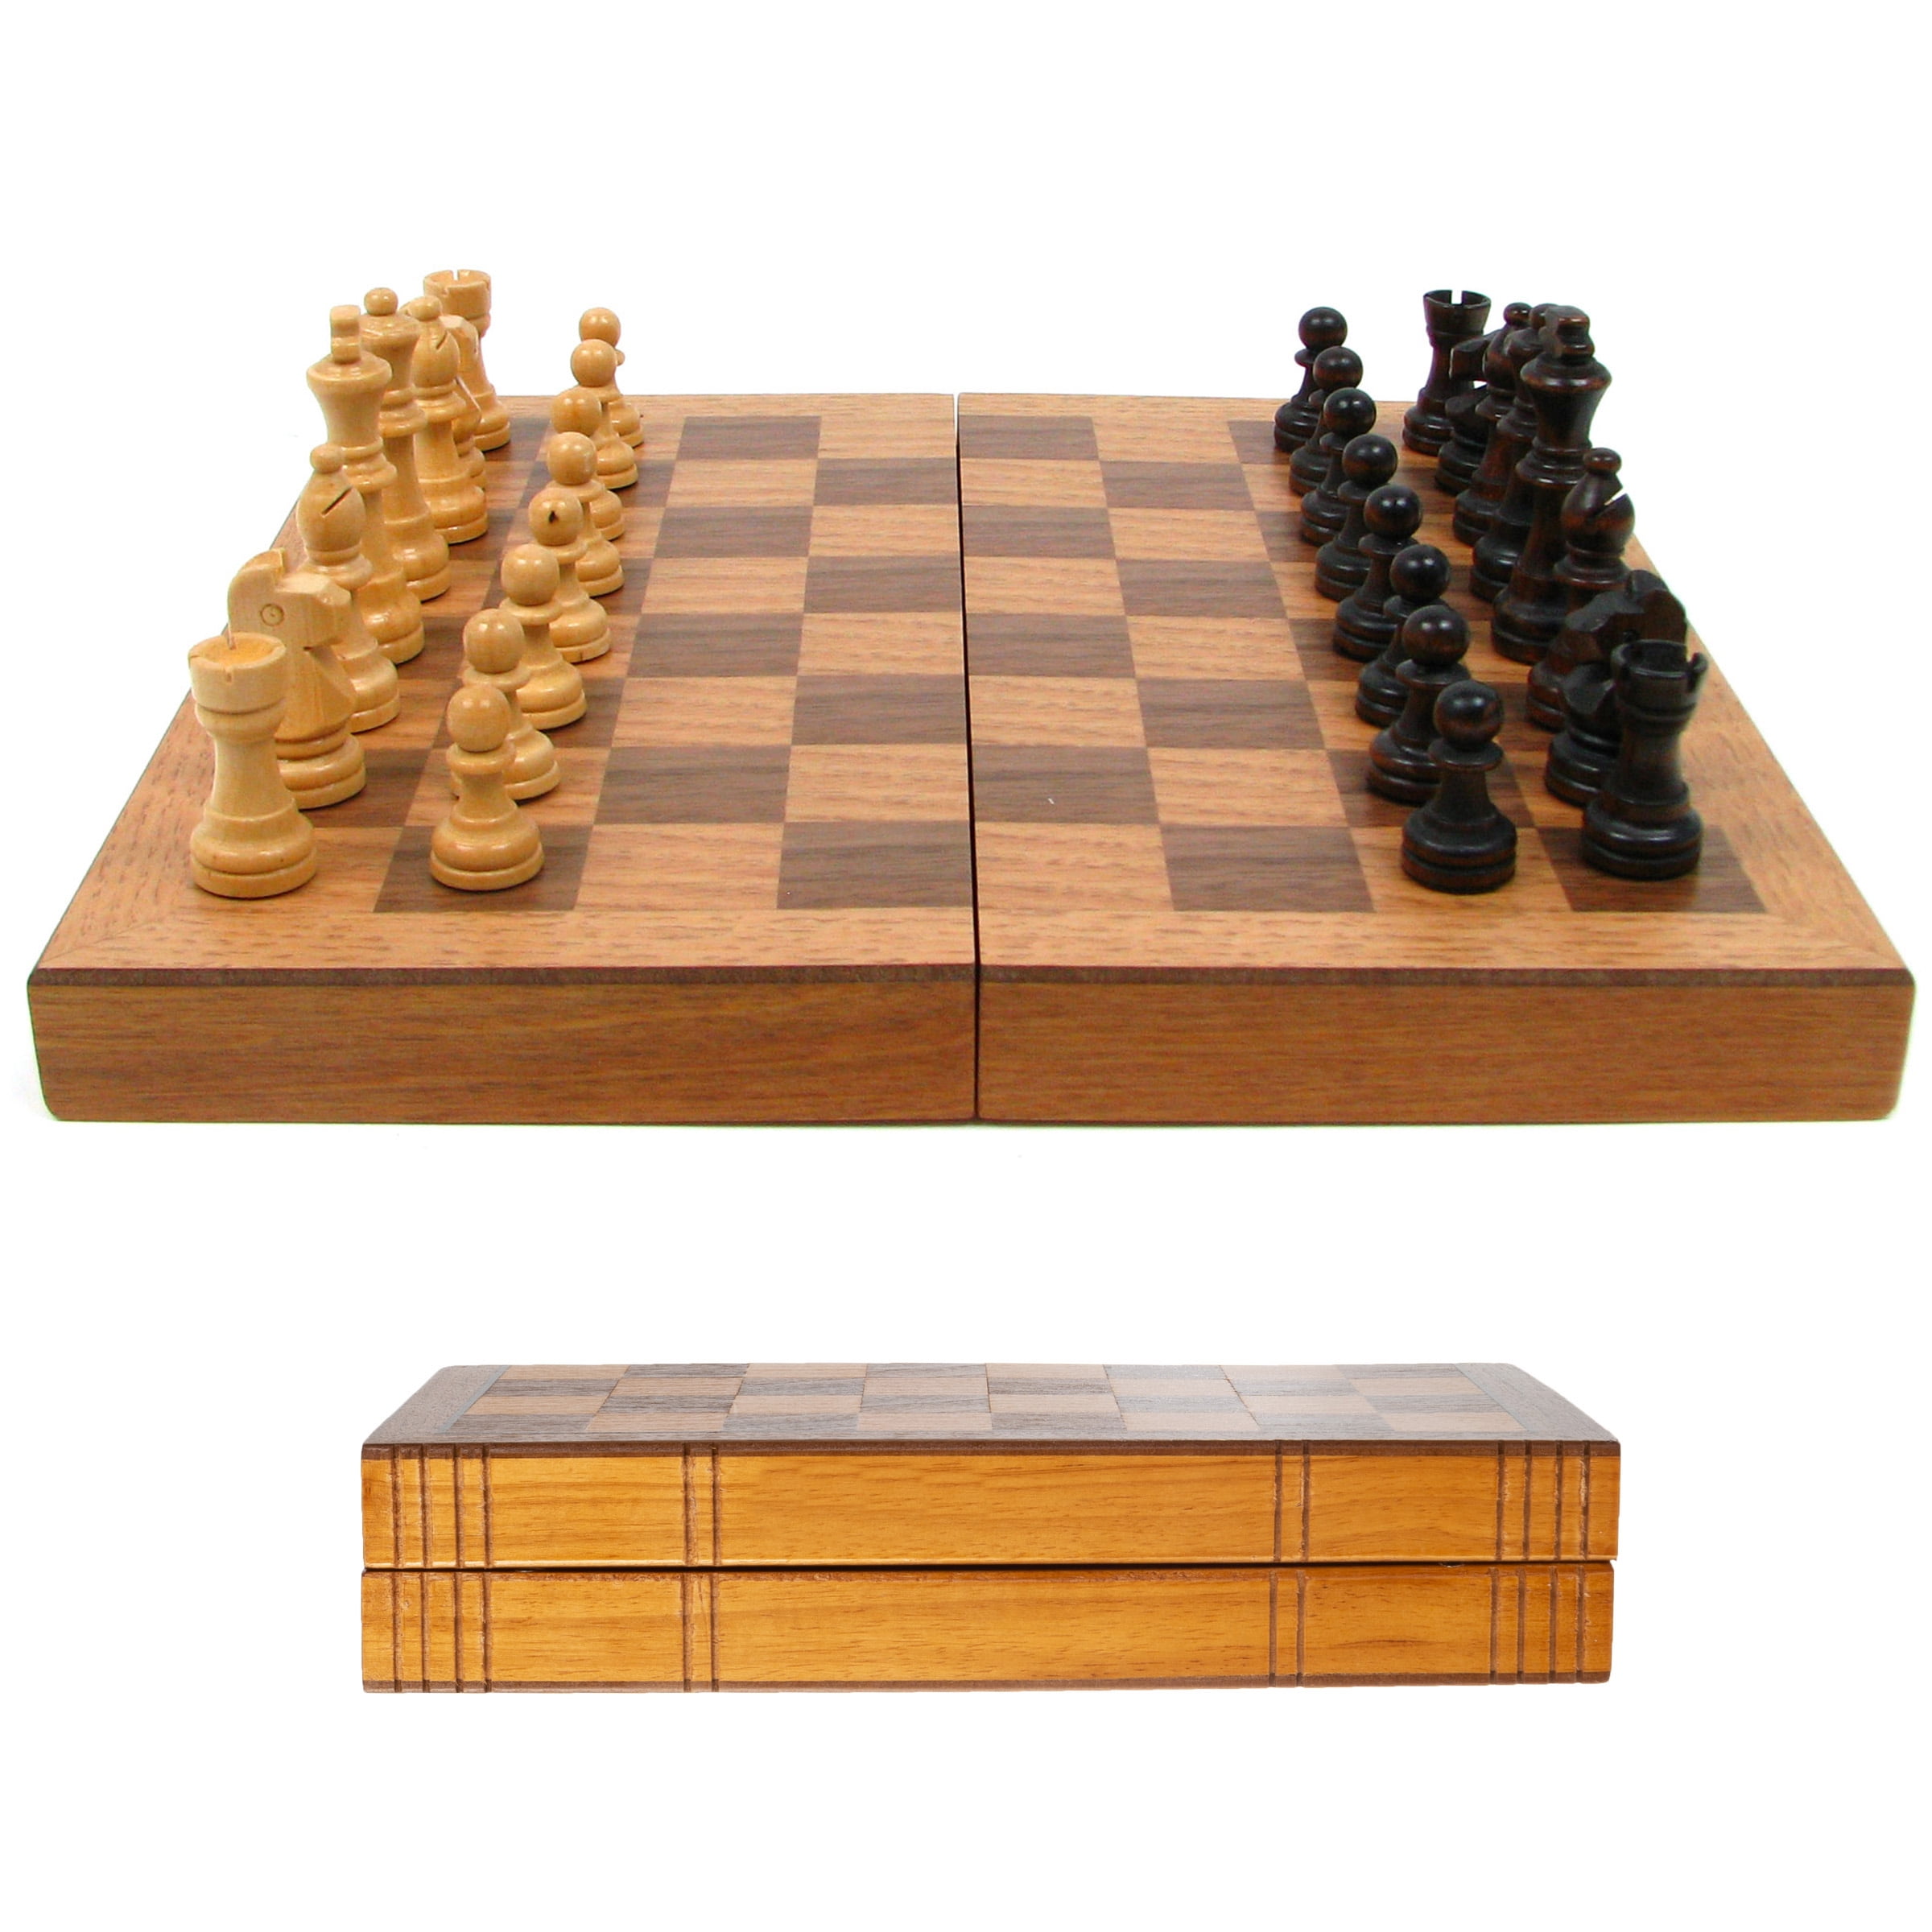 Details about   Wooden Chess Pieces Staunton Game Chessmen 3.5 inch King Handcrafted Exquisite 